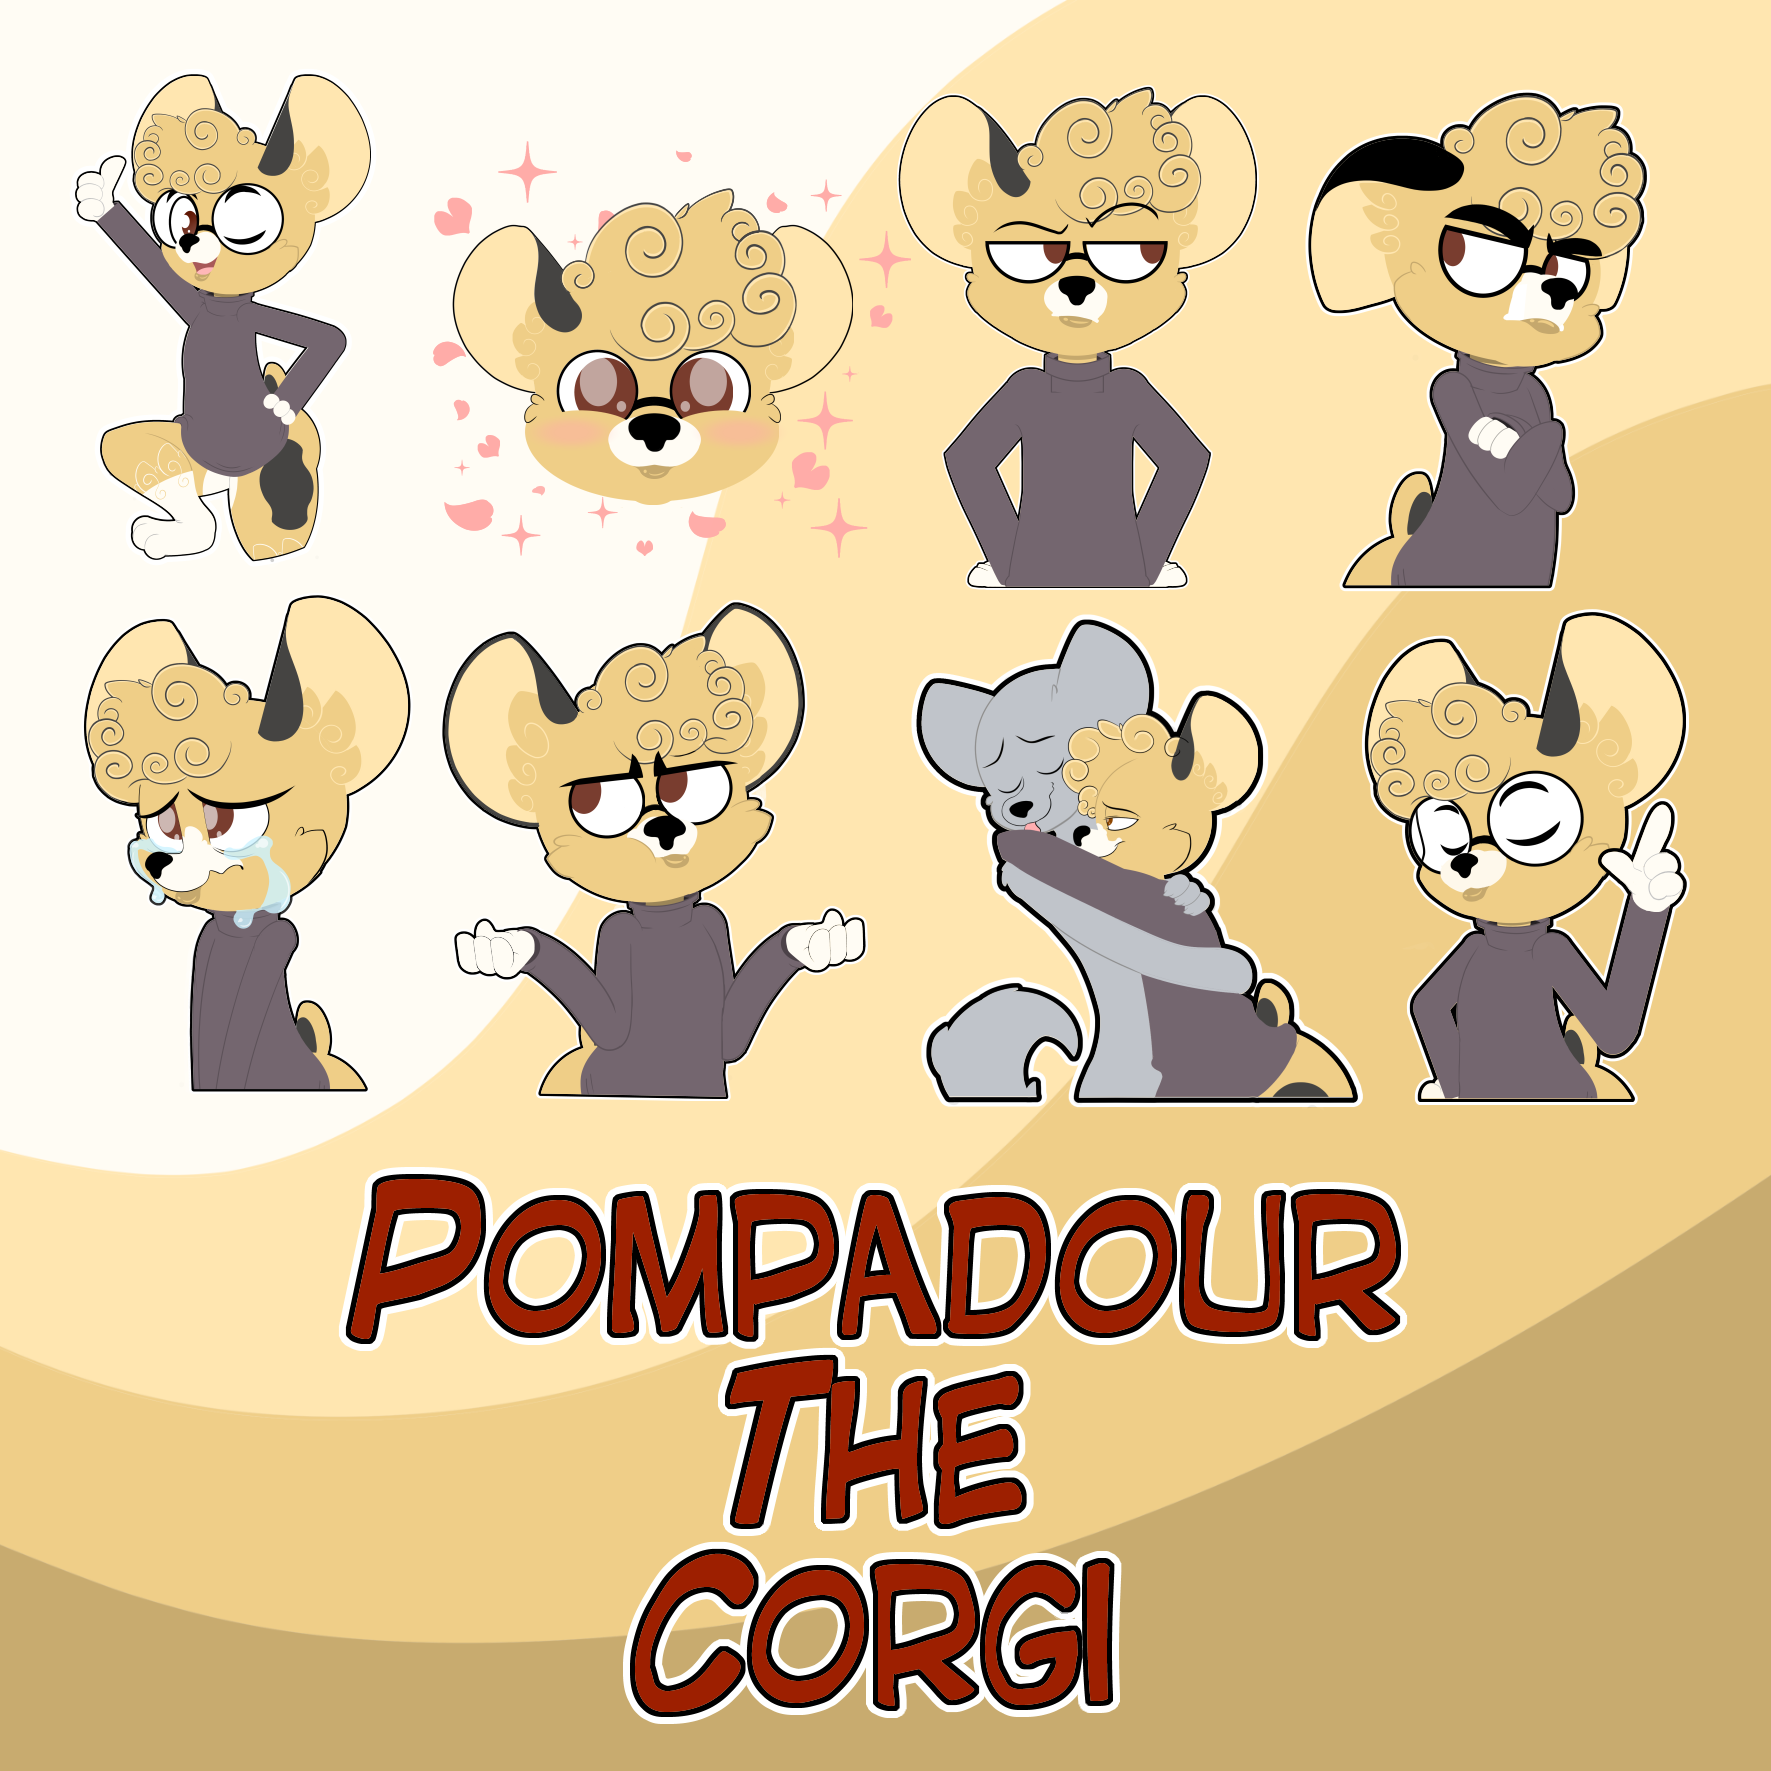 2019 - Pompadour sticker pack by RickRaccoon